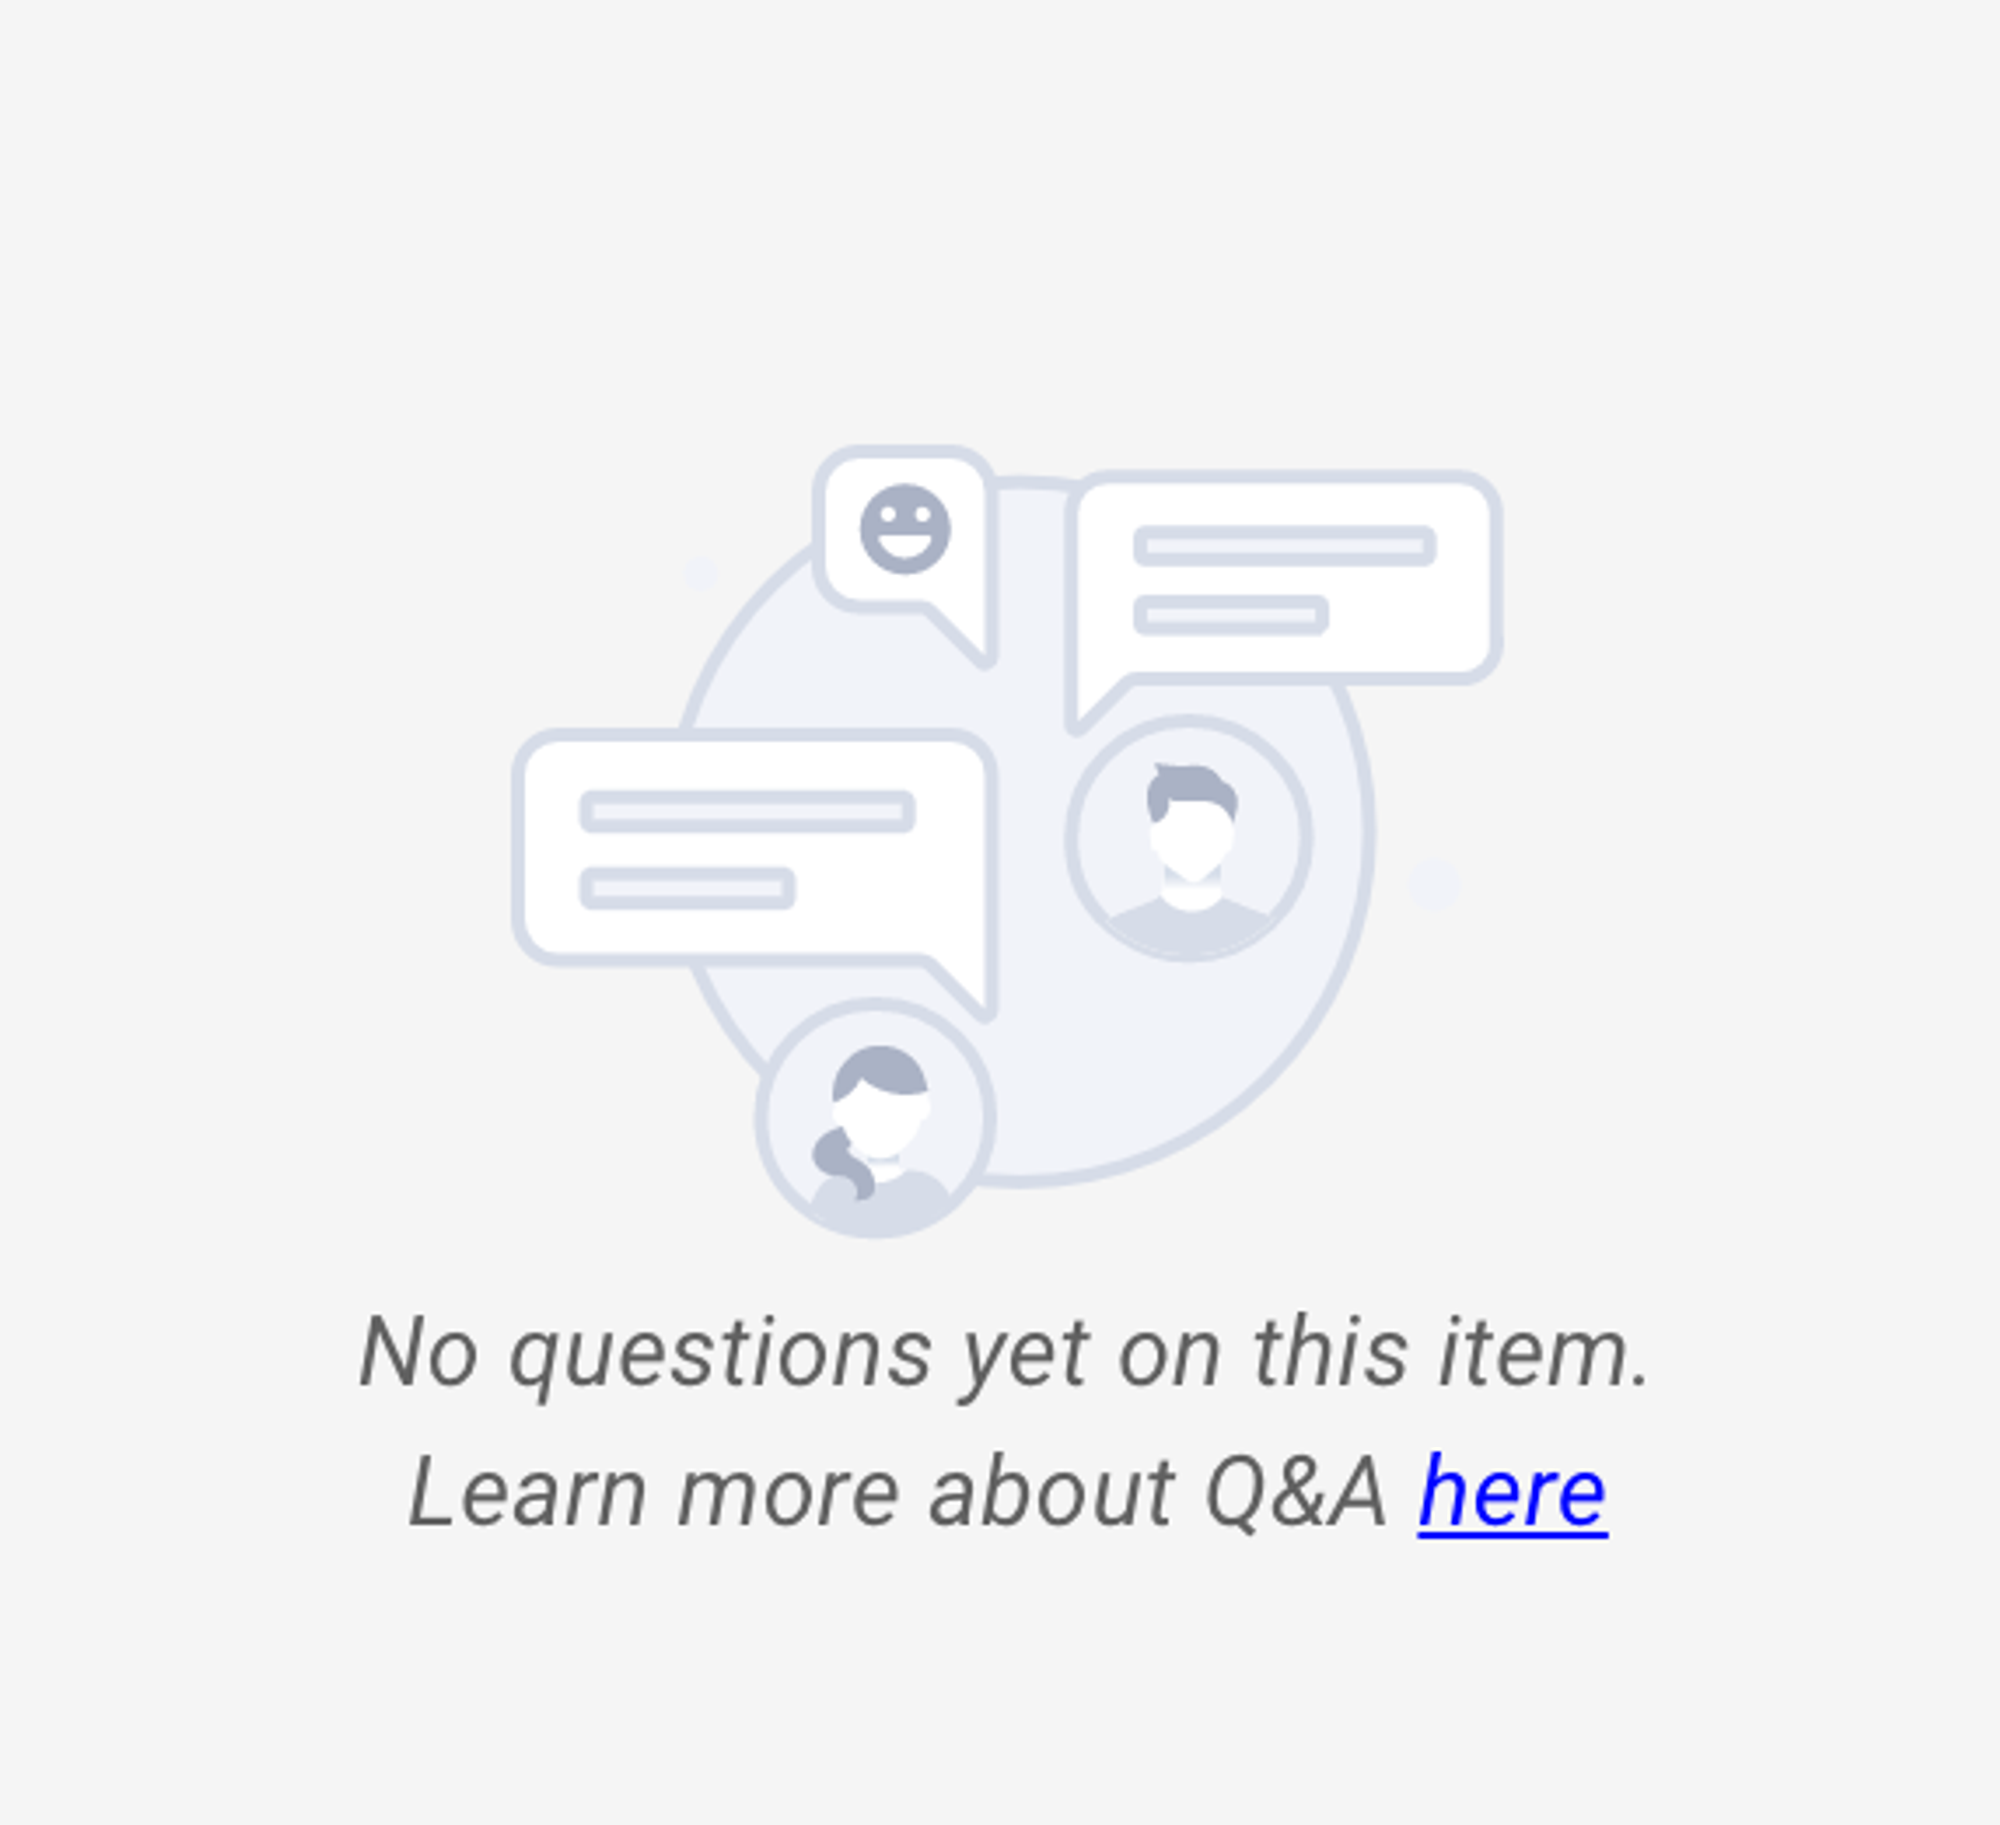 Q&A sidebar empty state message